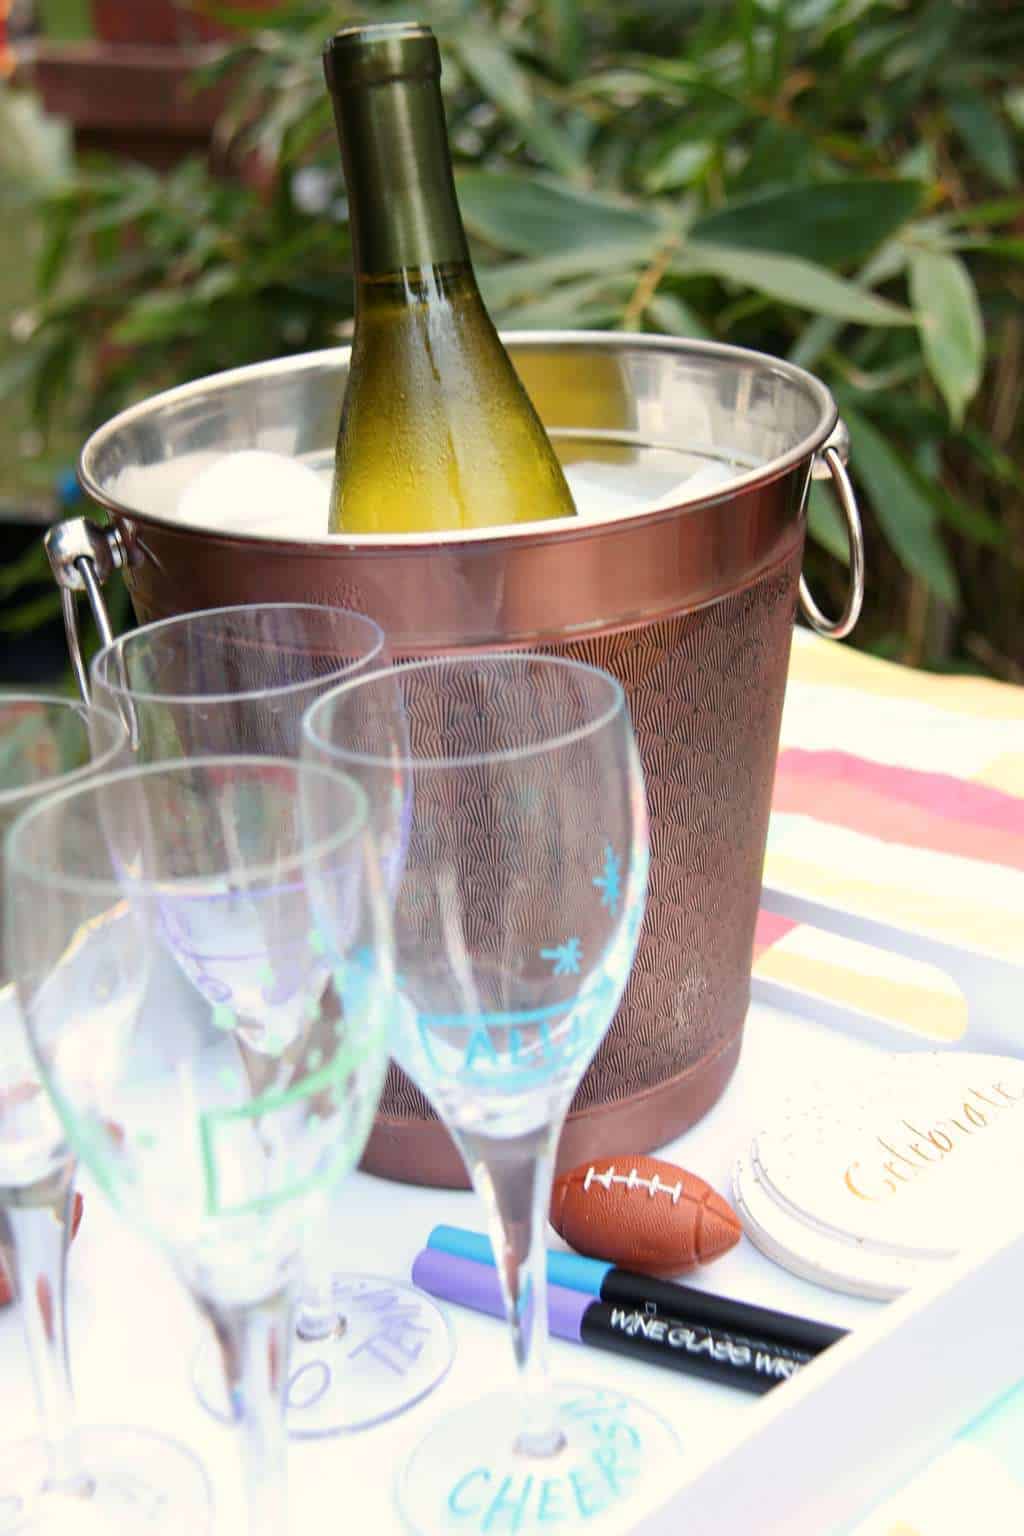 Game Day Celebration Tips to include the ladies | Fun Entertaining Ideas with Wine Glass Writer | Mimosa Bar and Wine Bar | www.madewithHAPPY.com